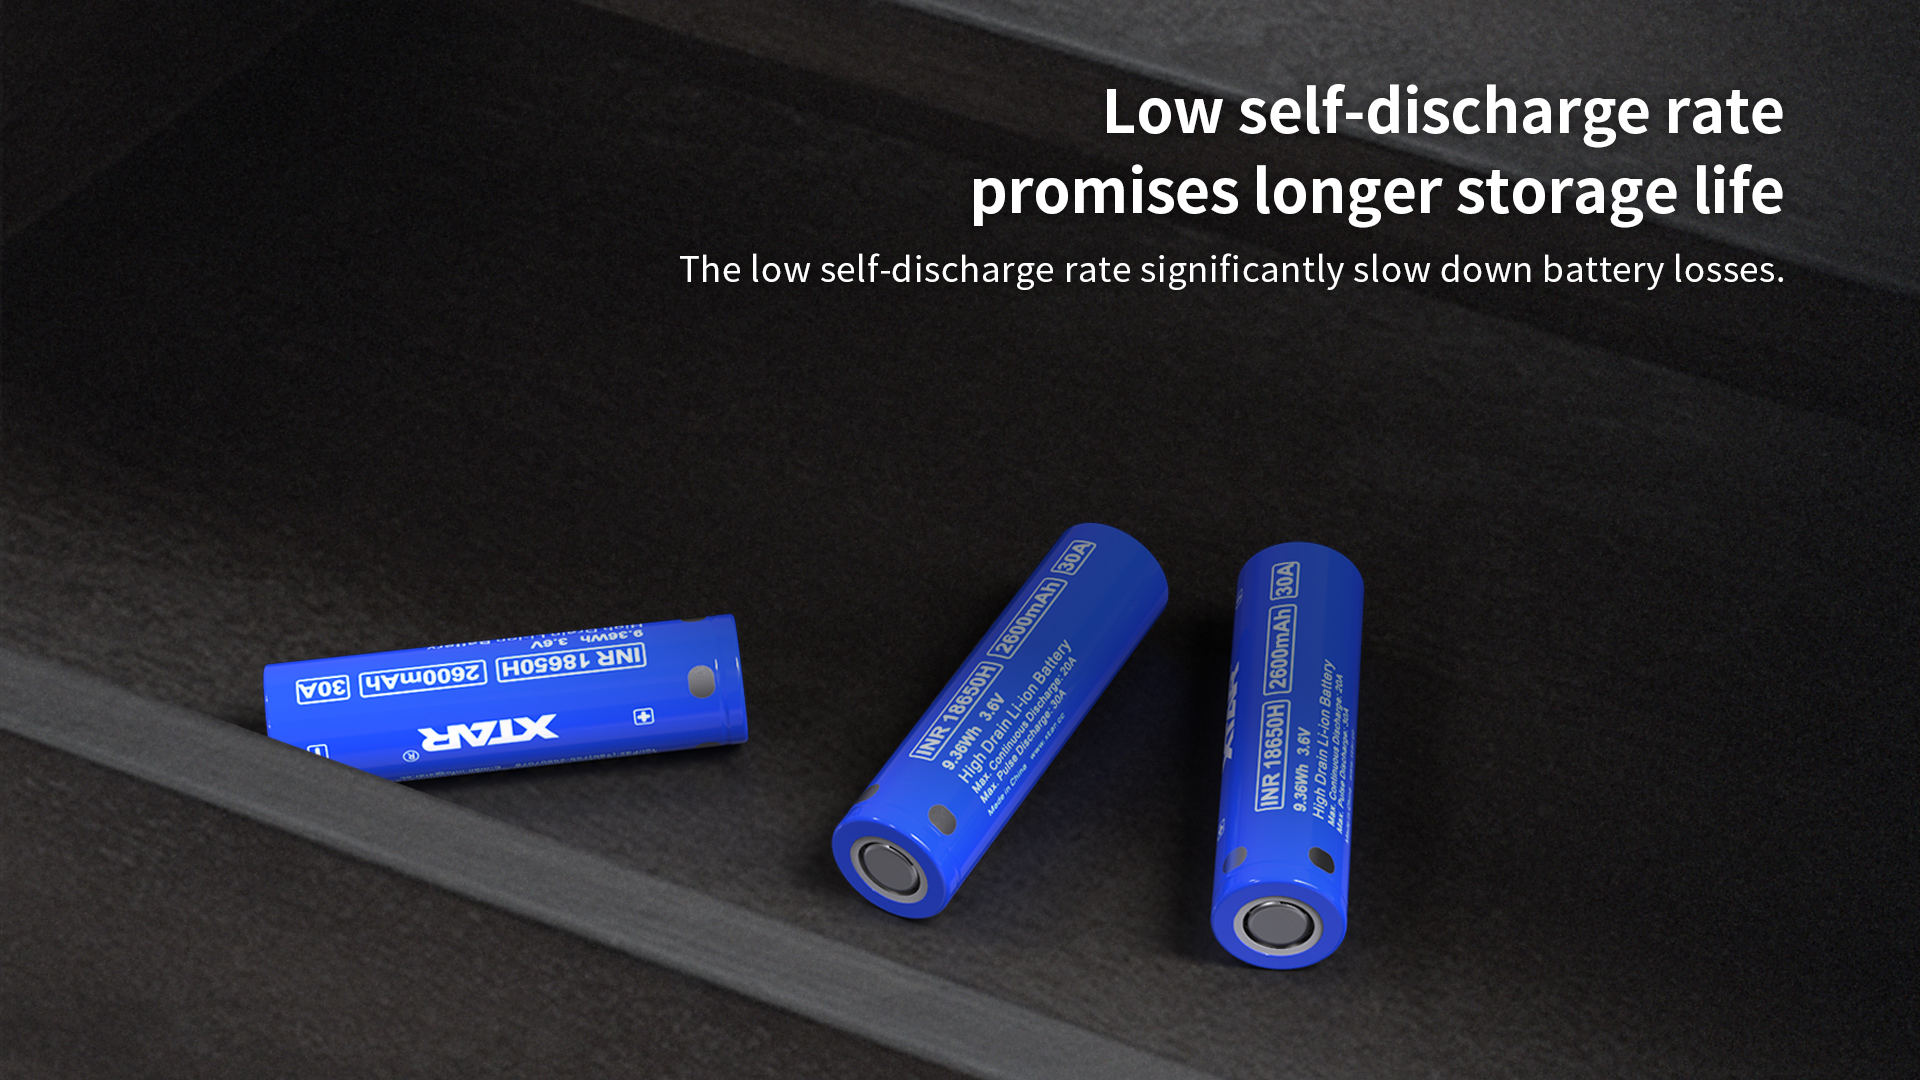 XTAR inr18650 2600mAh has low self-discharge rate, which slow down battery losses.